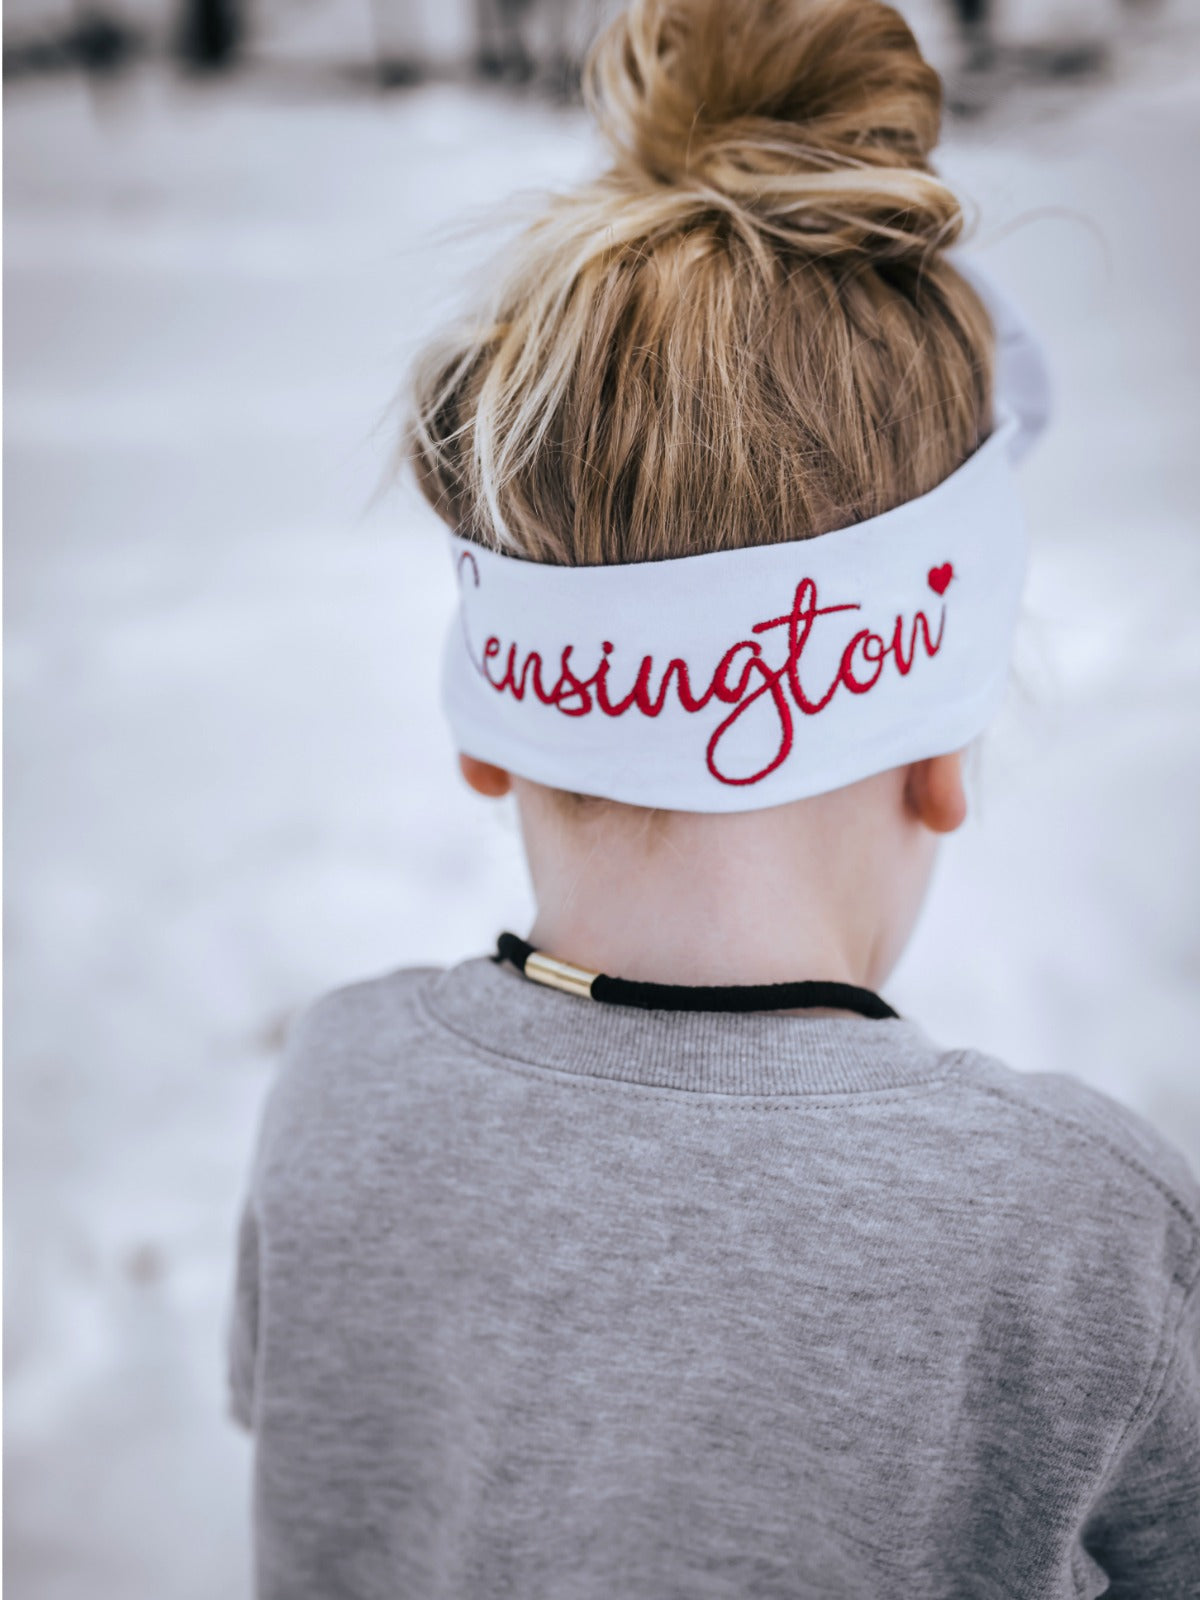 Personalized Valentine's Day Headband for Girls